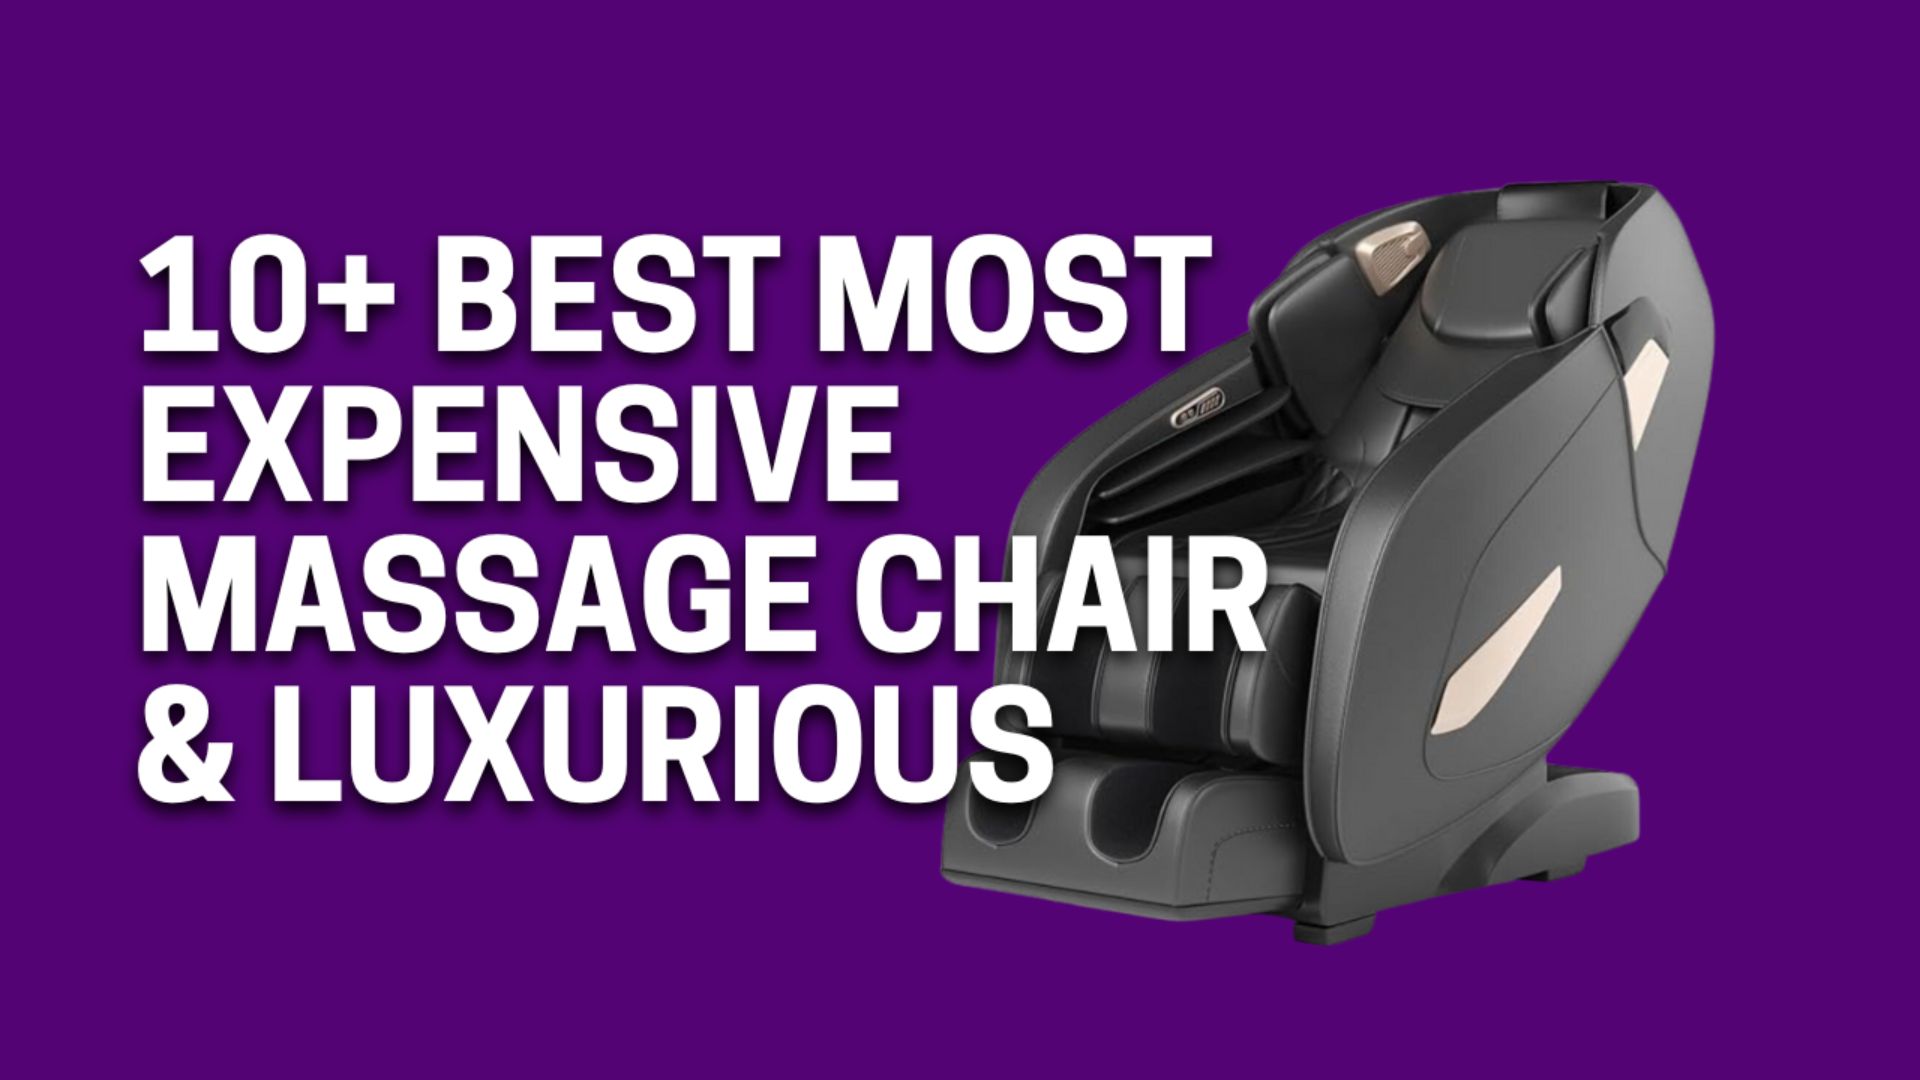 Best Most Expensive Massage Chair & Luxurious